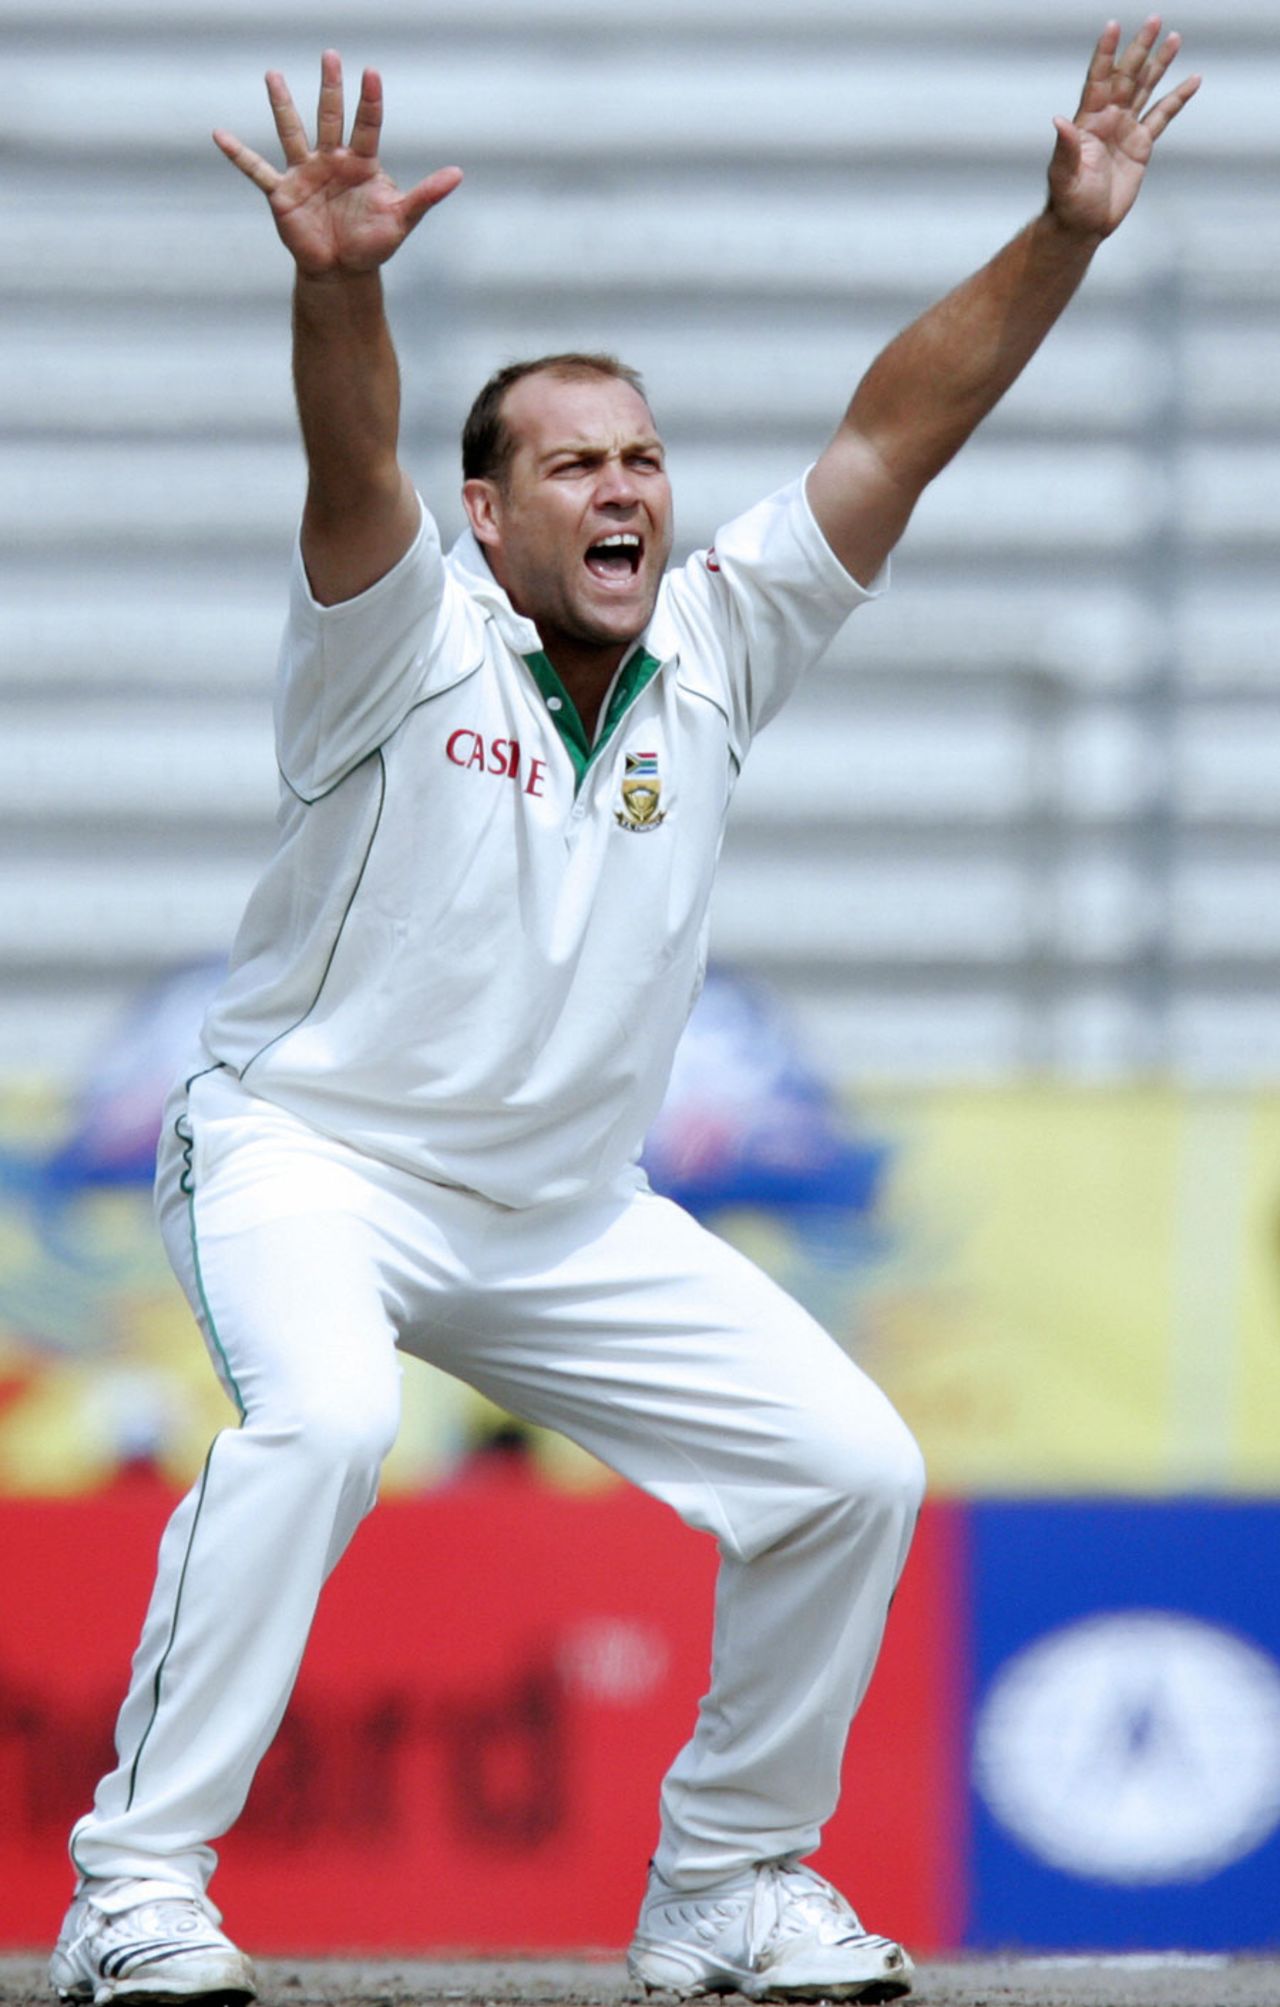 Jacques Kallis' five-wicket haul limited Bangladesh's lead, Bangladesh v South Africa, 1st Test, Mirpur, 3rd day, February 24, 2008 